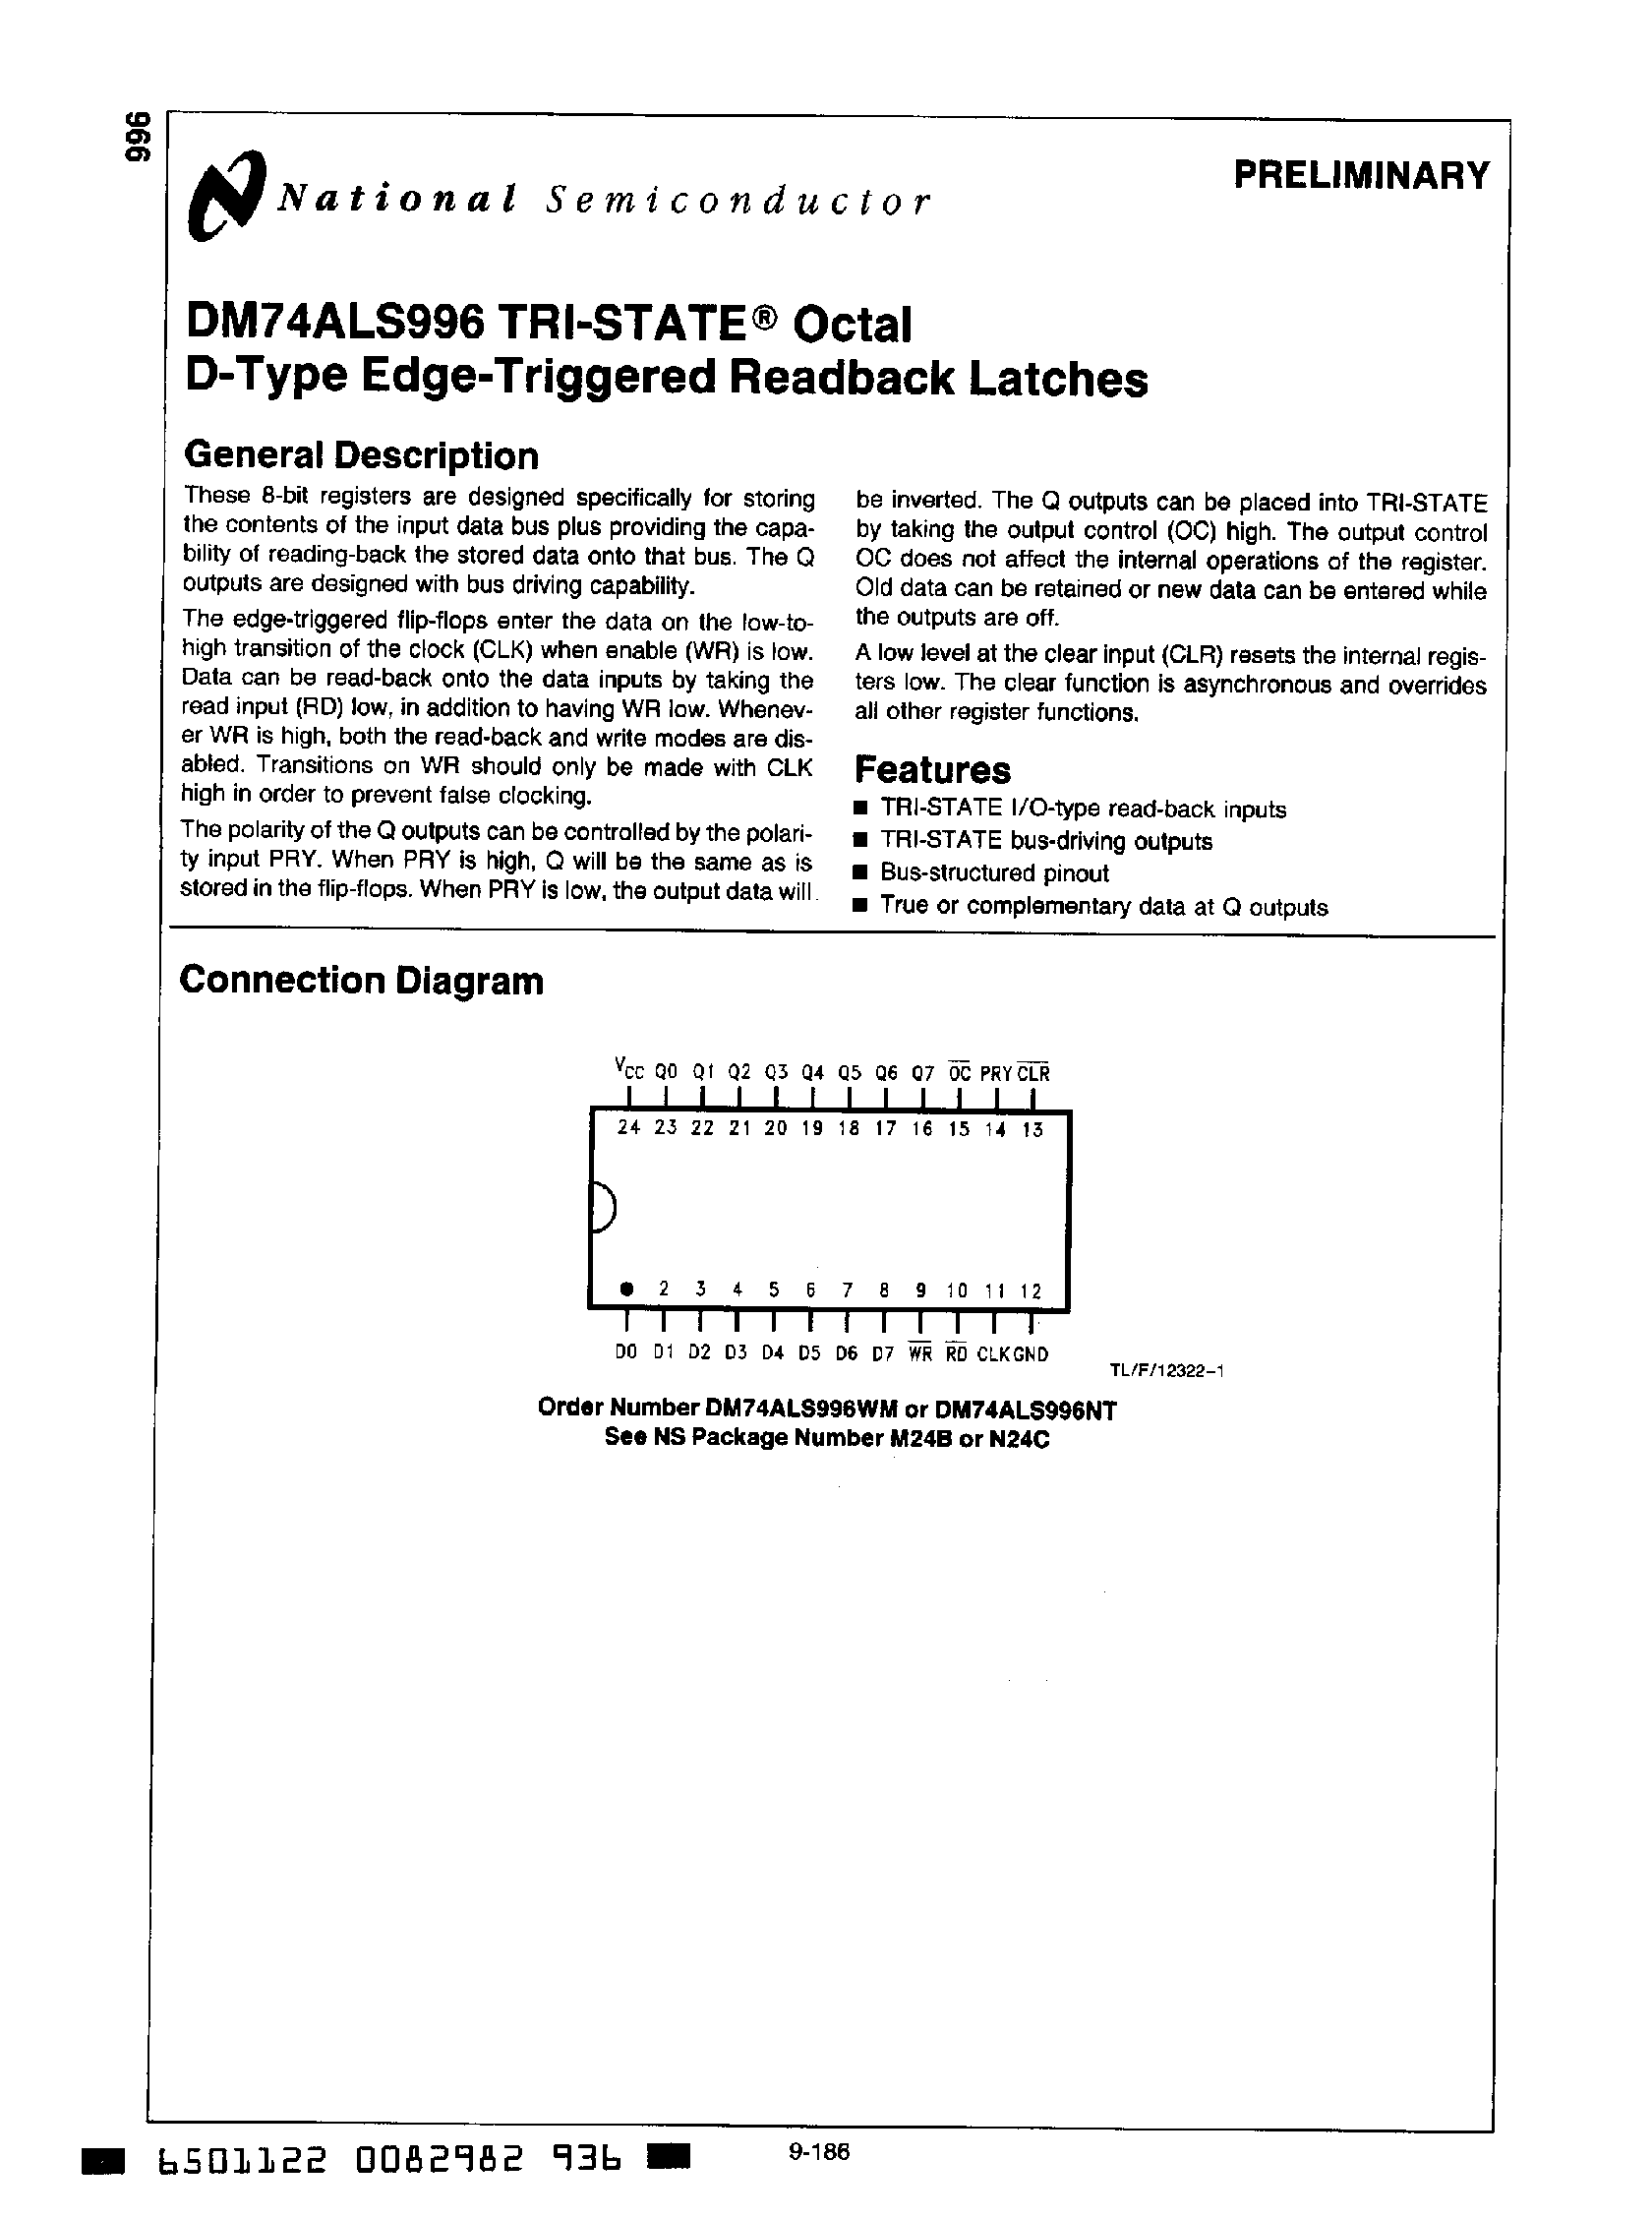 Datasheet DM74ALS996 - D Type Edge Triggered Readback Latches page 1